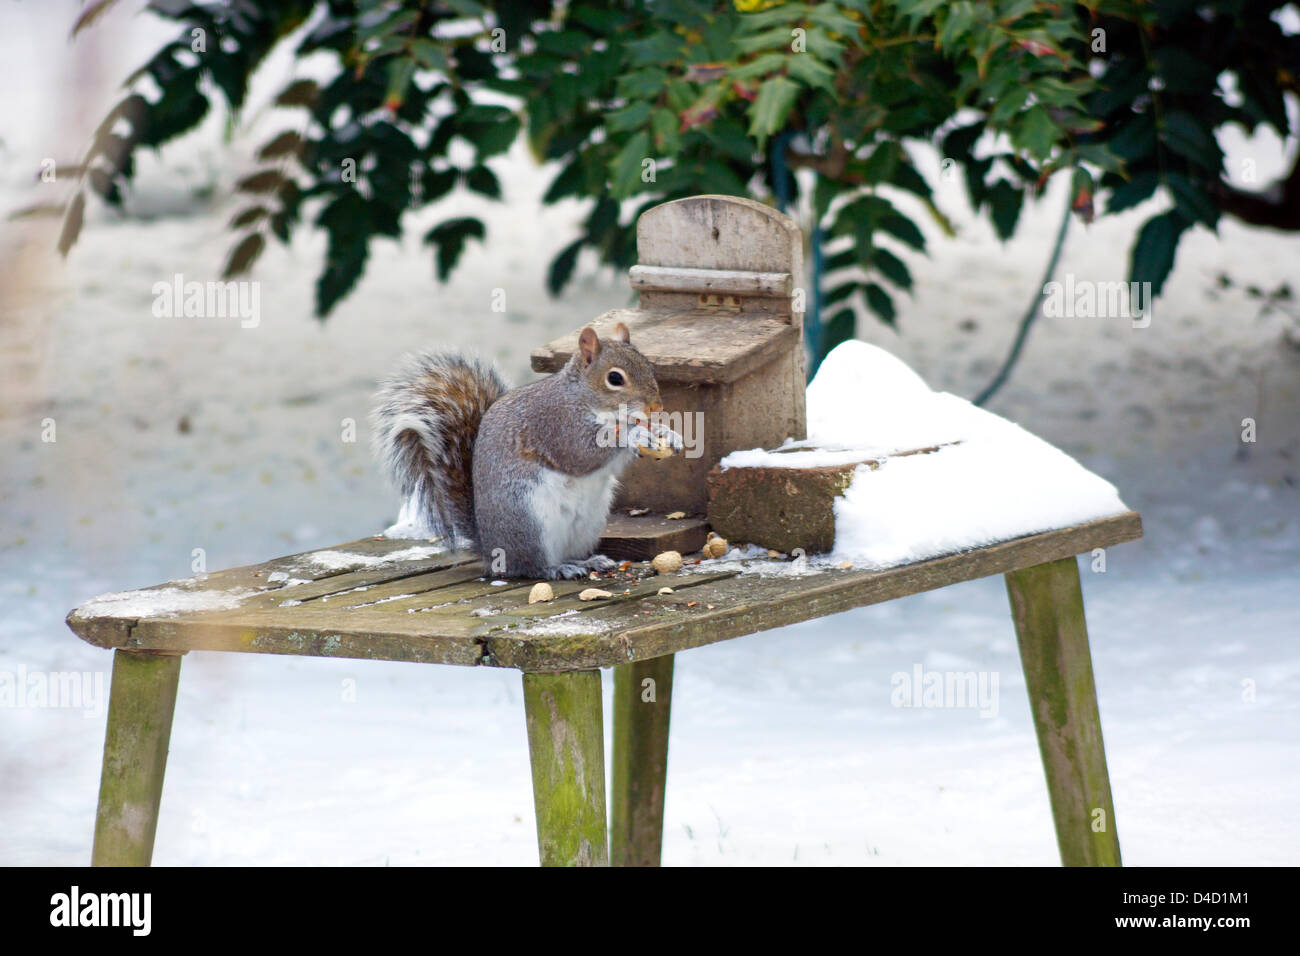 Worthing, Sussex, UK. 12th March 2013. Snow in the south east of England - Grey squirrel (sciurus carolinensis) eating a nut in a snow covered wildlife friendly garden.  Credit:  Libby Welch / Alamy Live News Stock Photo